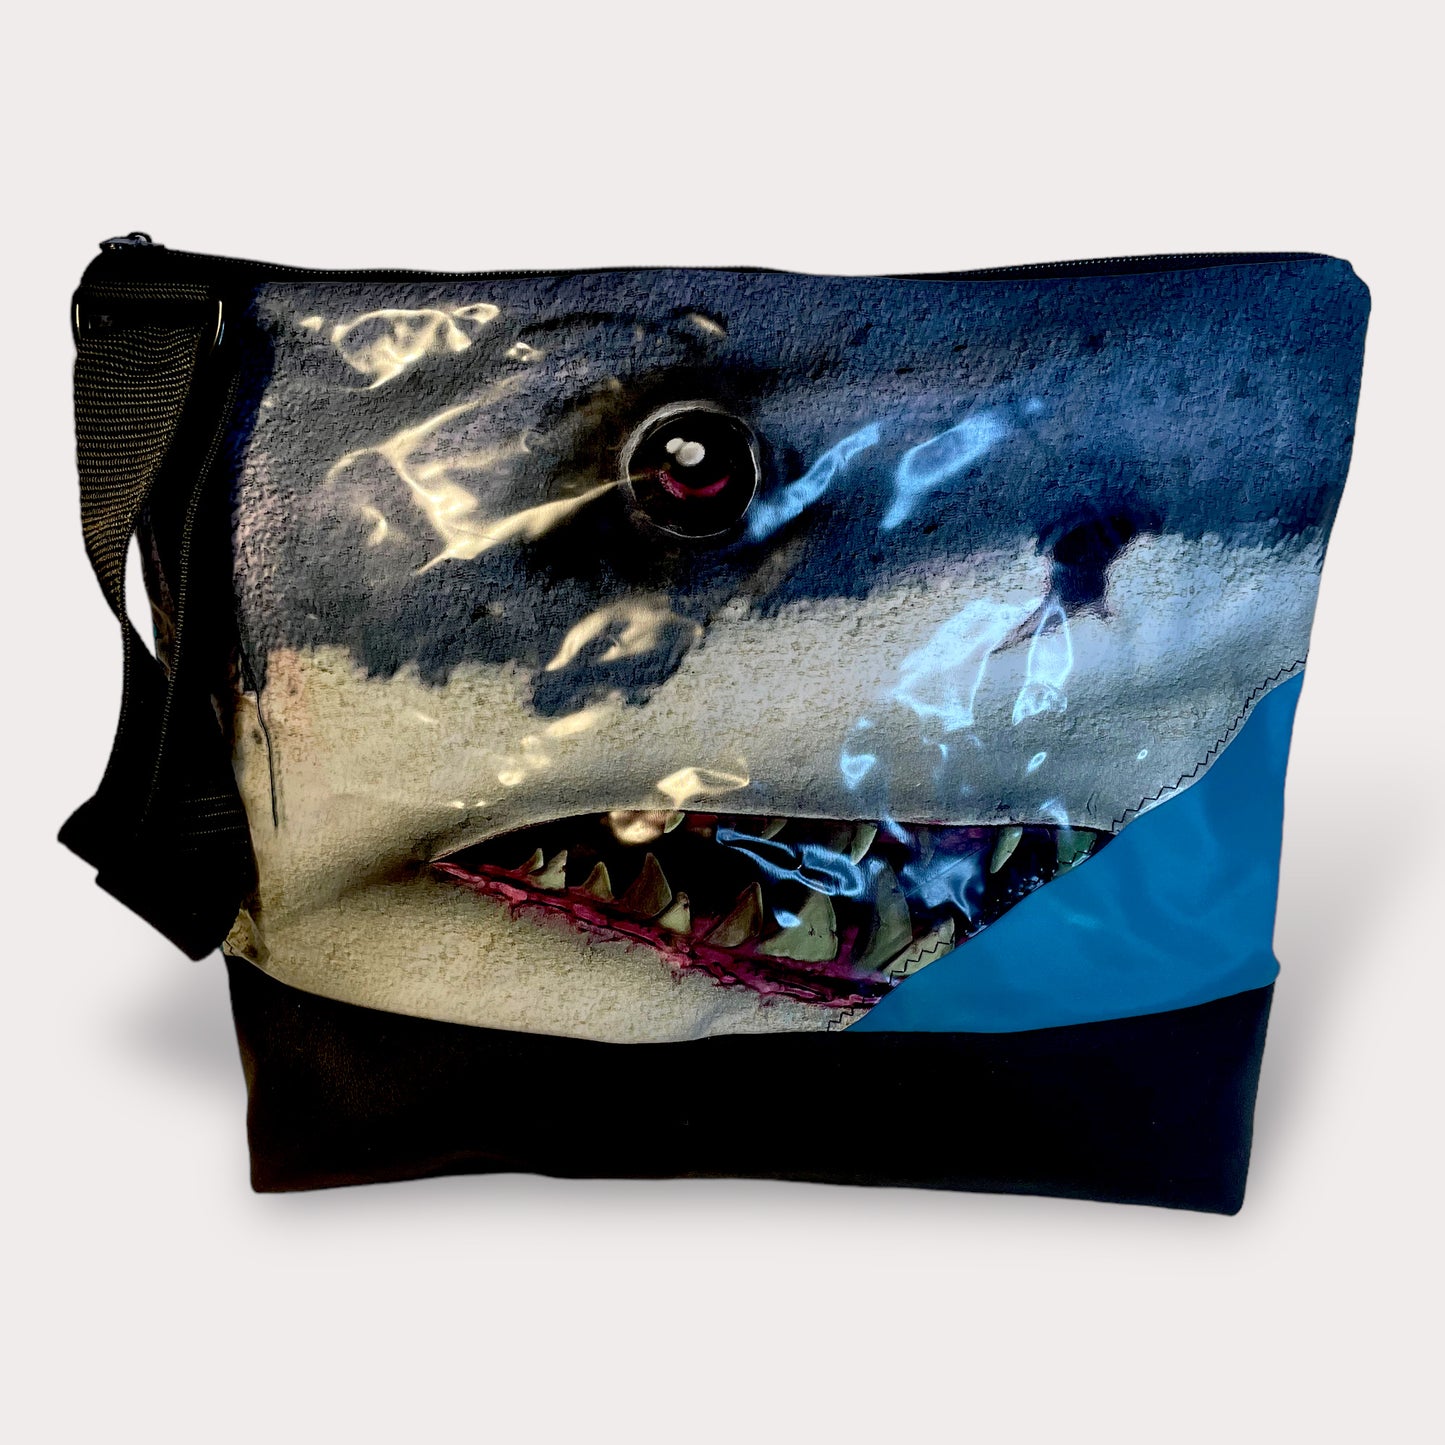 Crossover Bag .  Shark . Pool Toy